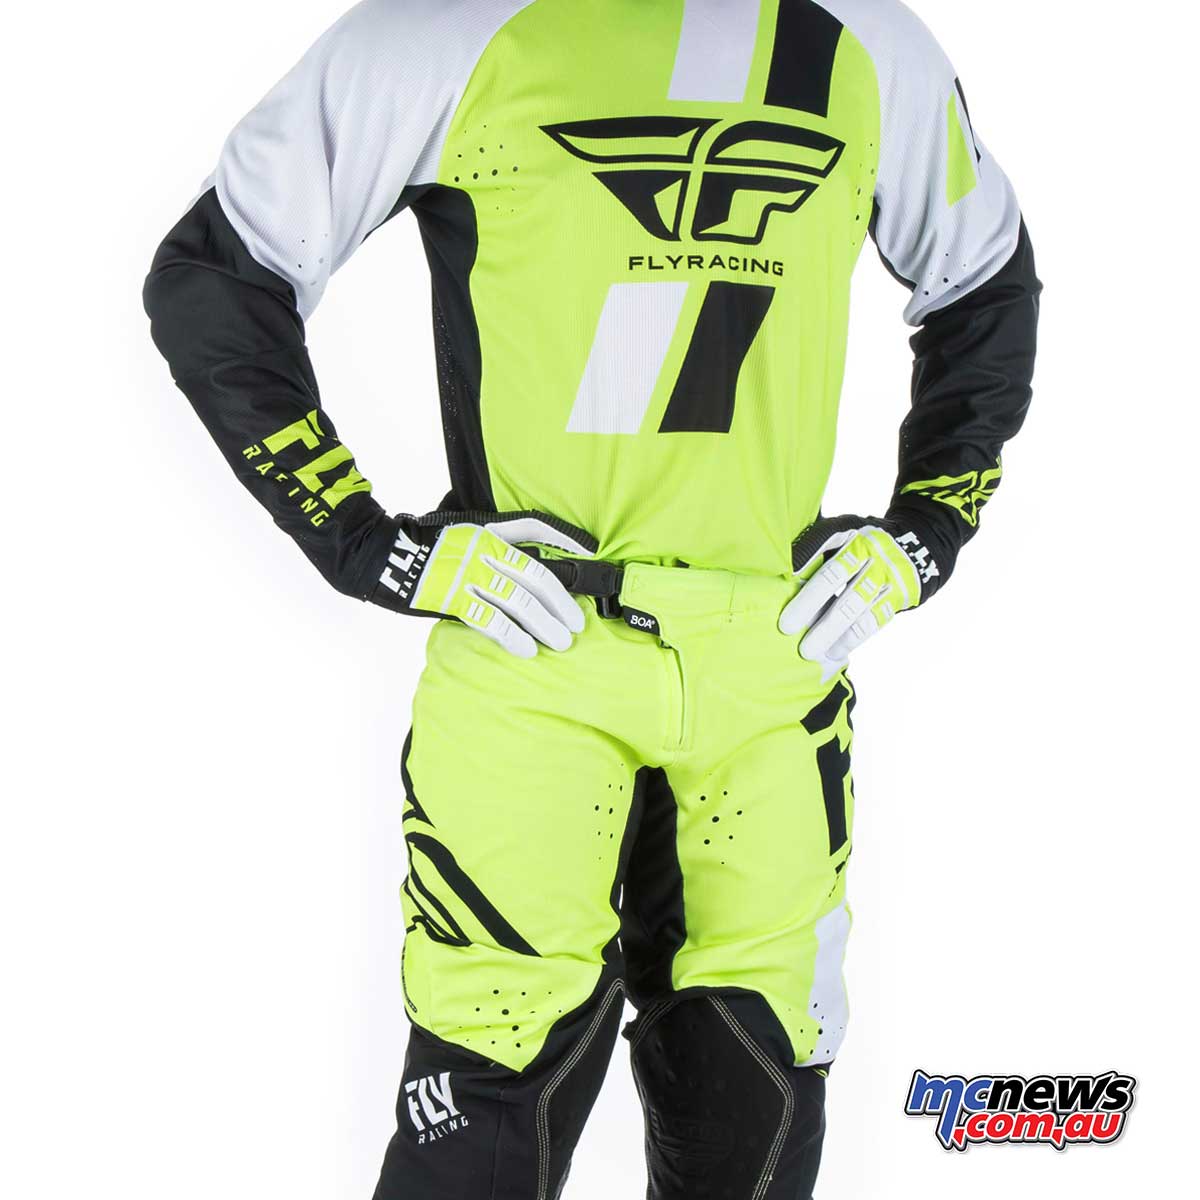 FLY 2019 range of gear has dropped | MCNews